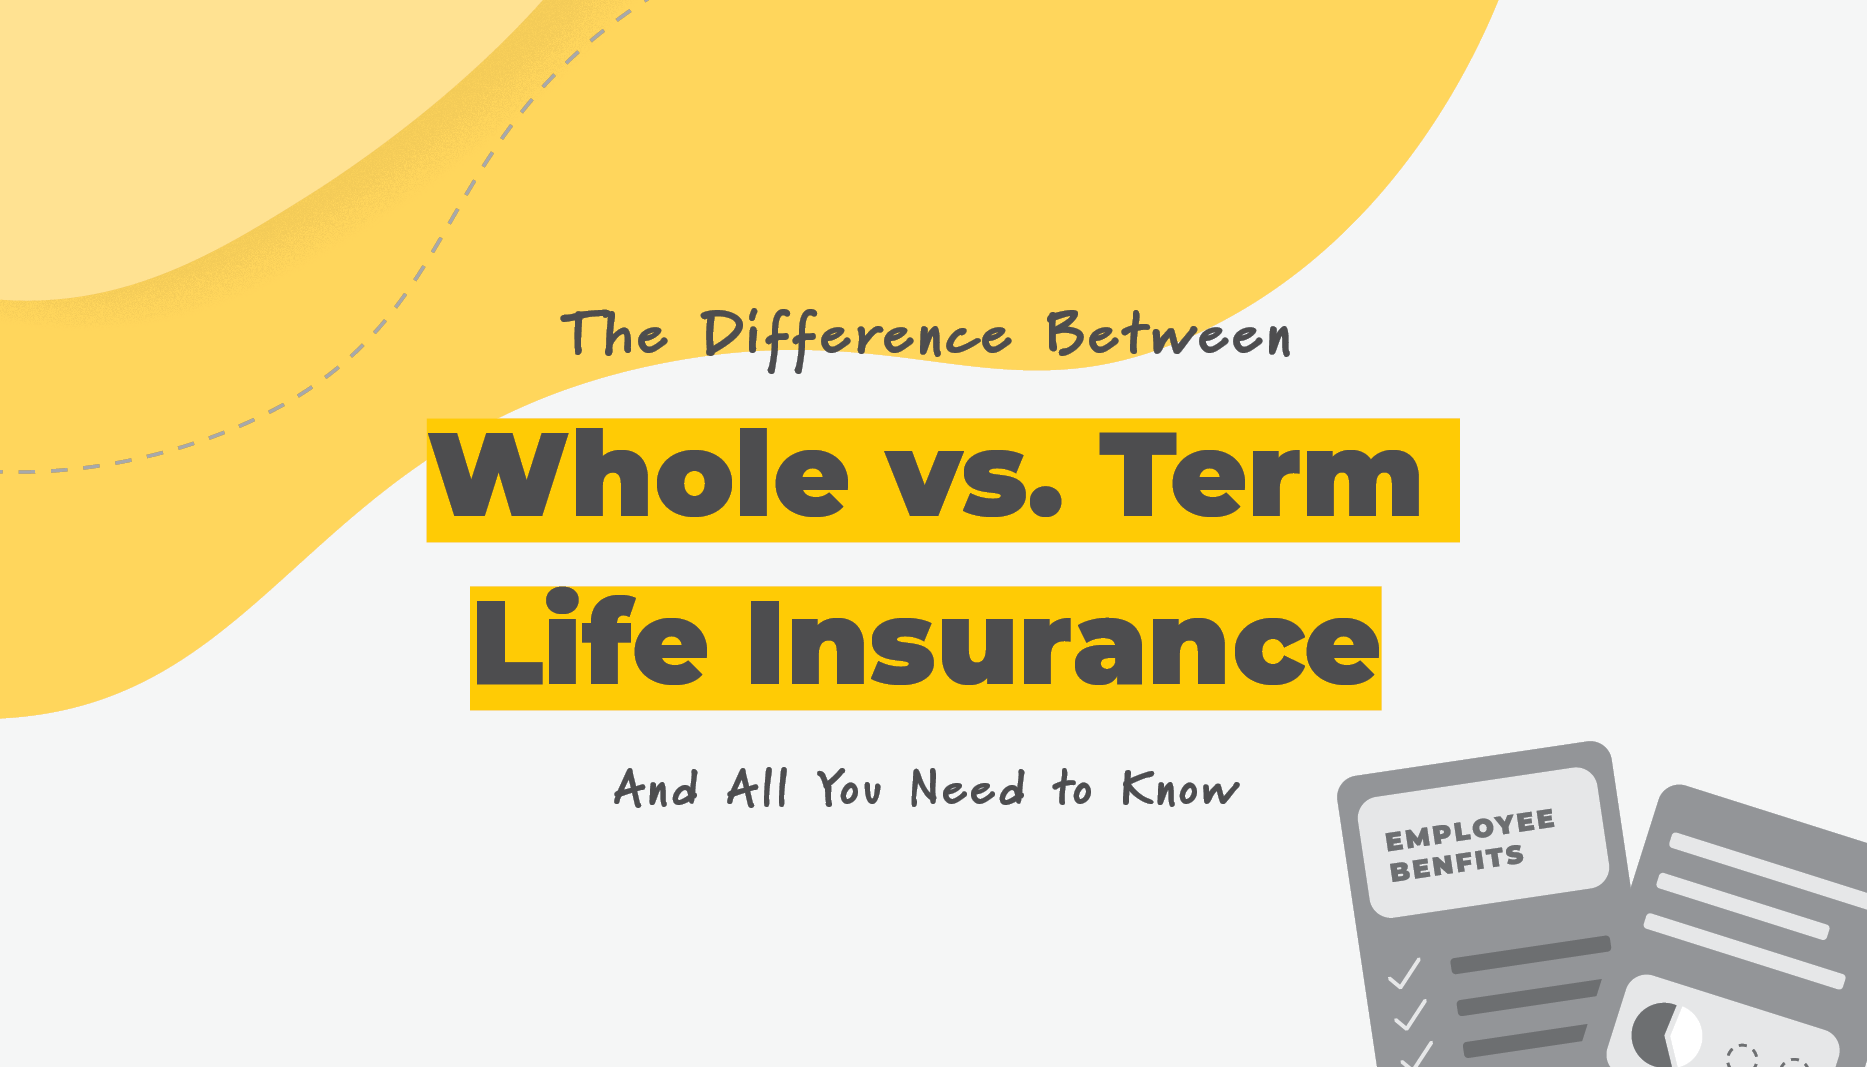 The Difference Between Whole vs. Term Life Insurance (And All You Need to Know) | Benefits by Design